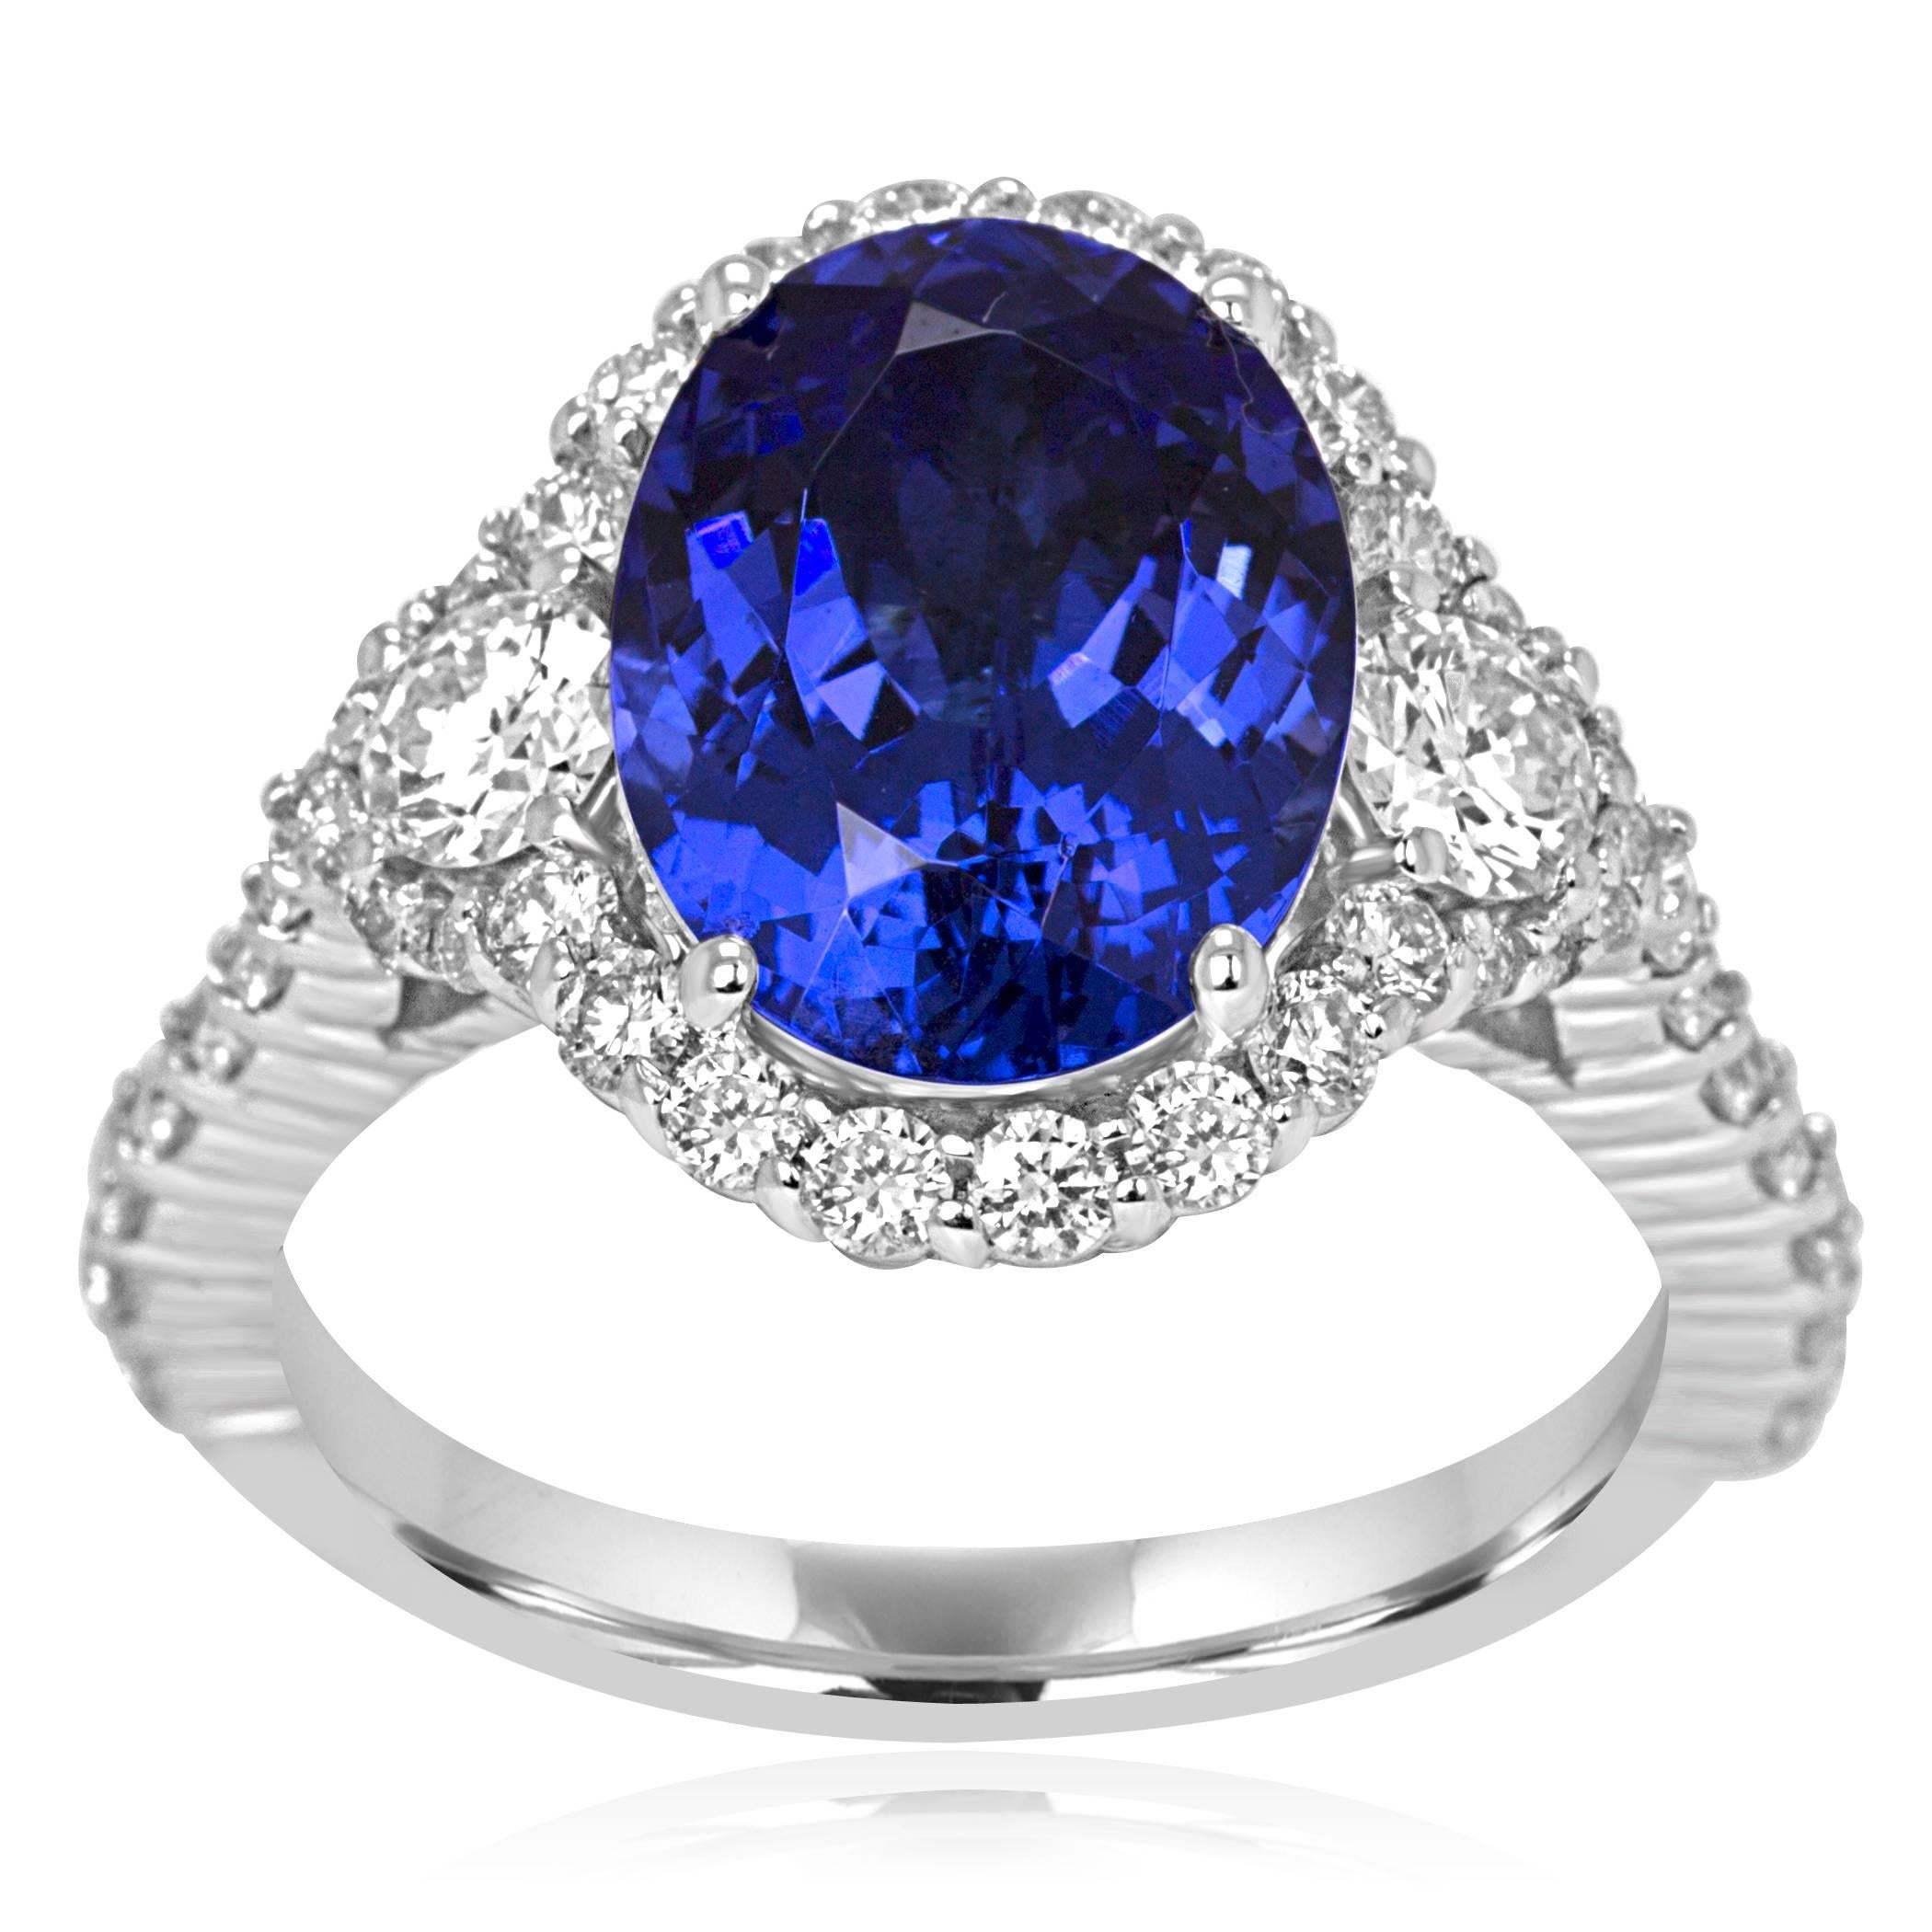 Tanzanite Oval 3.80 Carat Flanked by 2 White Diamond Rounds 0.34 Carat encircled in a single Halo of White Round Diamonds 0.79 Carat in a stunning Handmade 14K White Gold Ring.

Style available in different price ranges. Prices are based on your